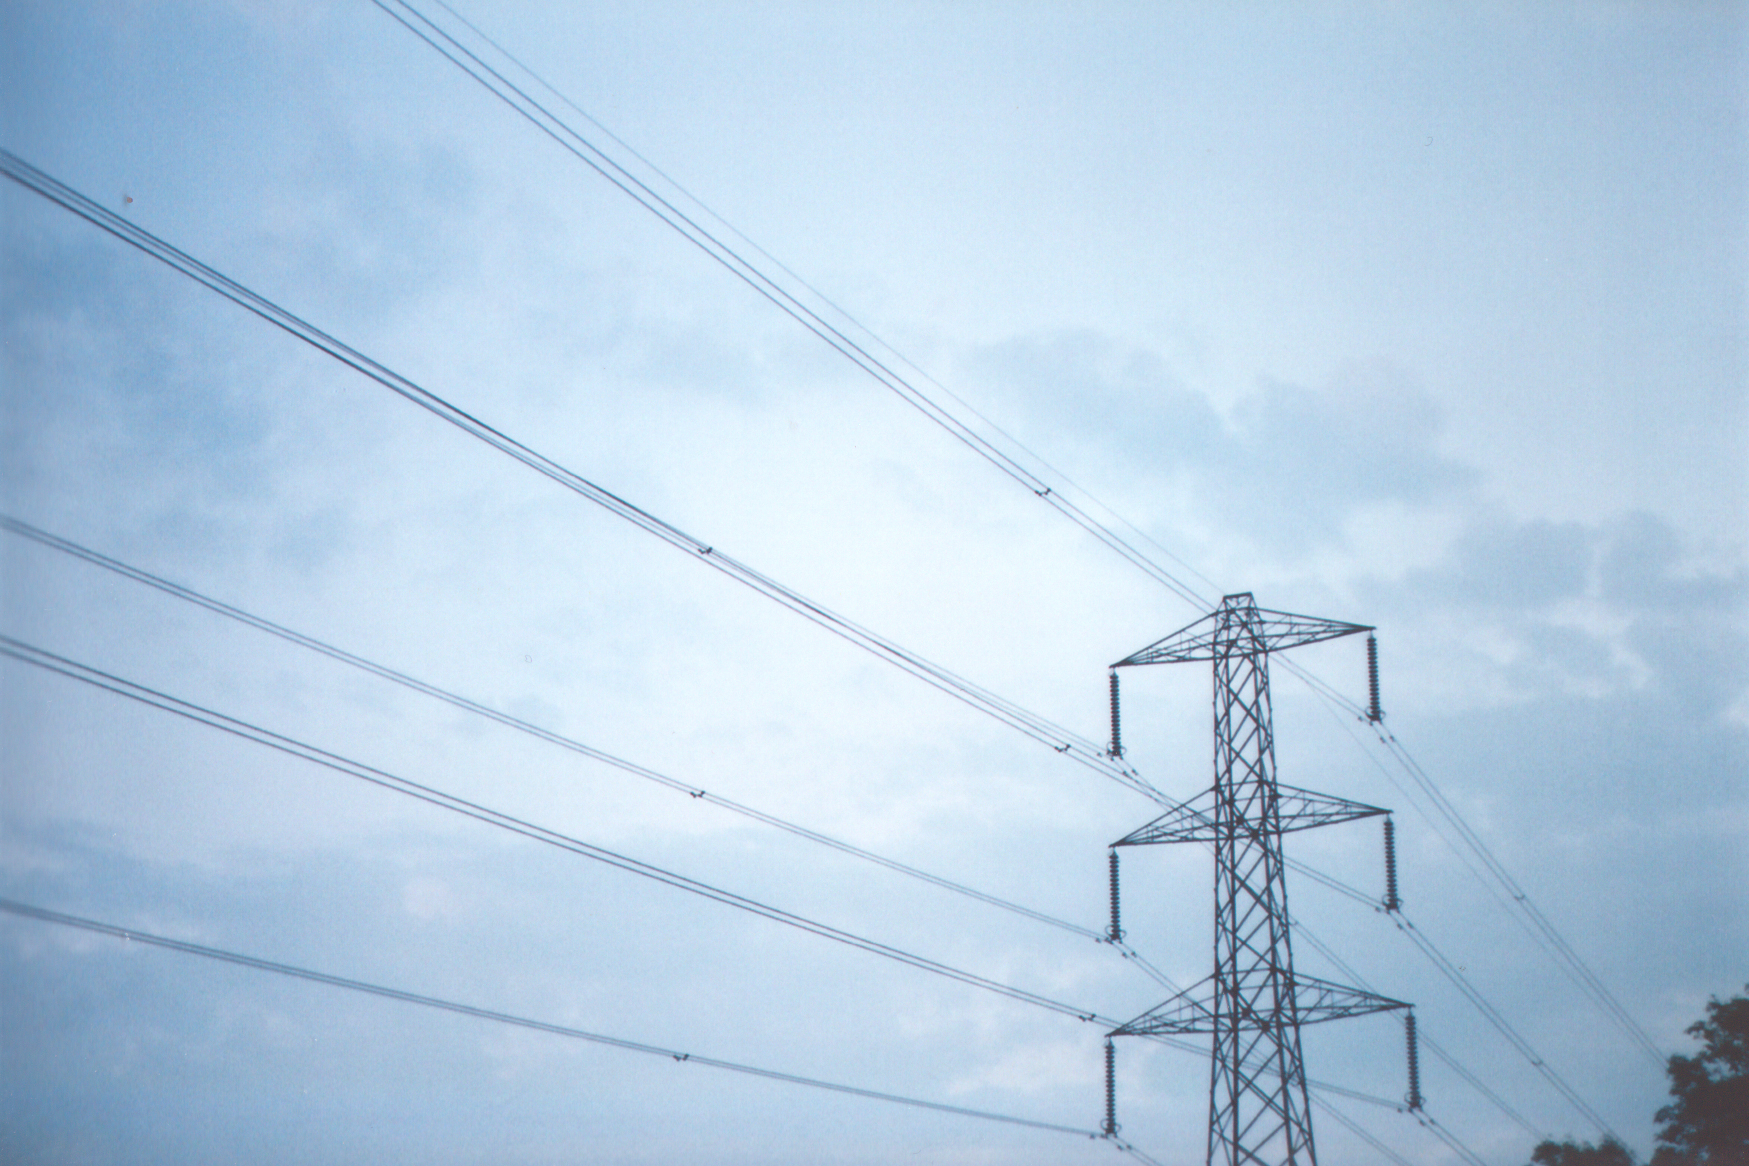 a line of high voltage electrical lines towering above